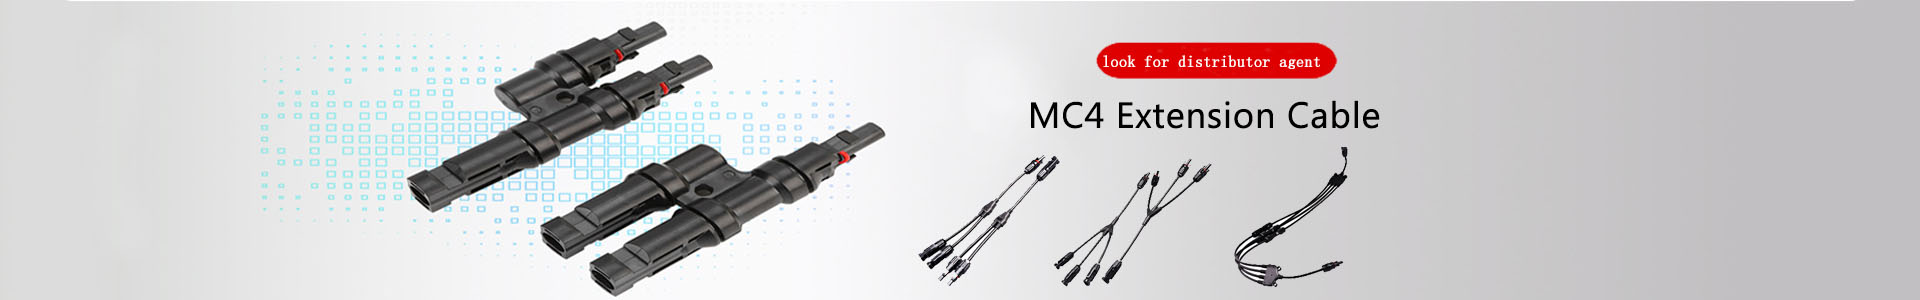 Solar Connector | Handwe Group-Solar | solar connector,solar branch connector,diode fuse connector,MC4 extnsion cable,H1Z2Z2 solar cable, UL4703 solar cable | Leading manufacturer and supplier of solar pv cables and connectors